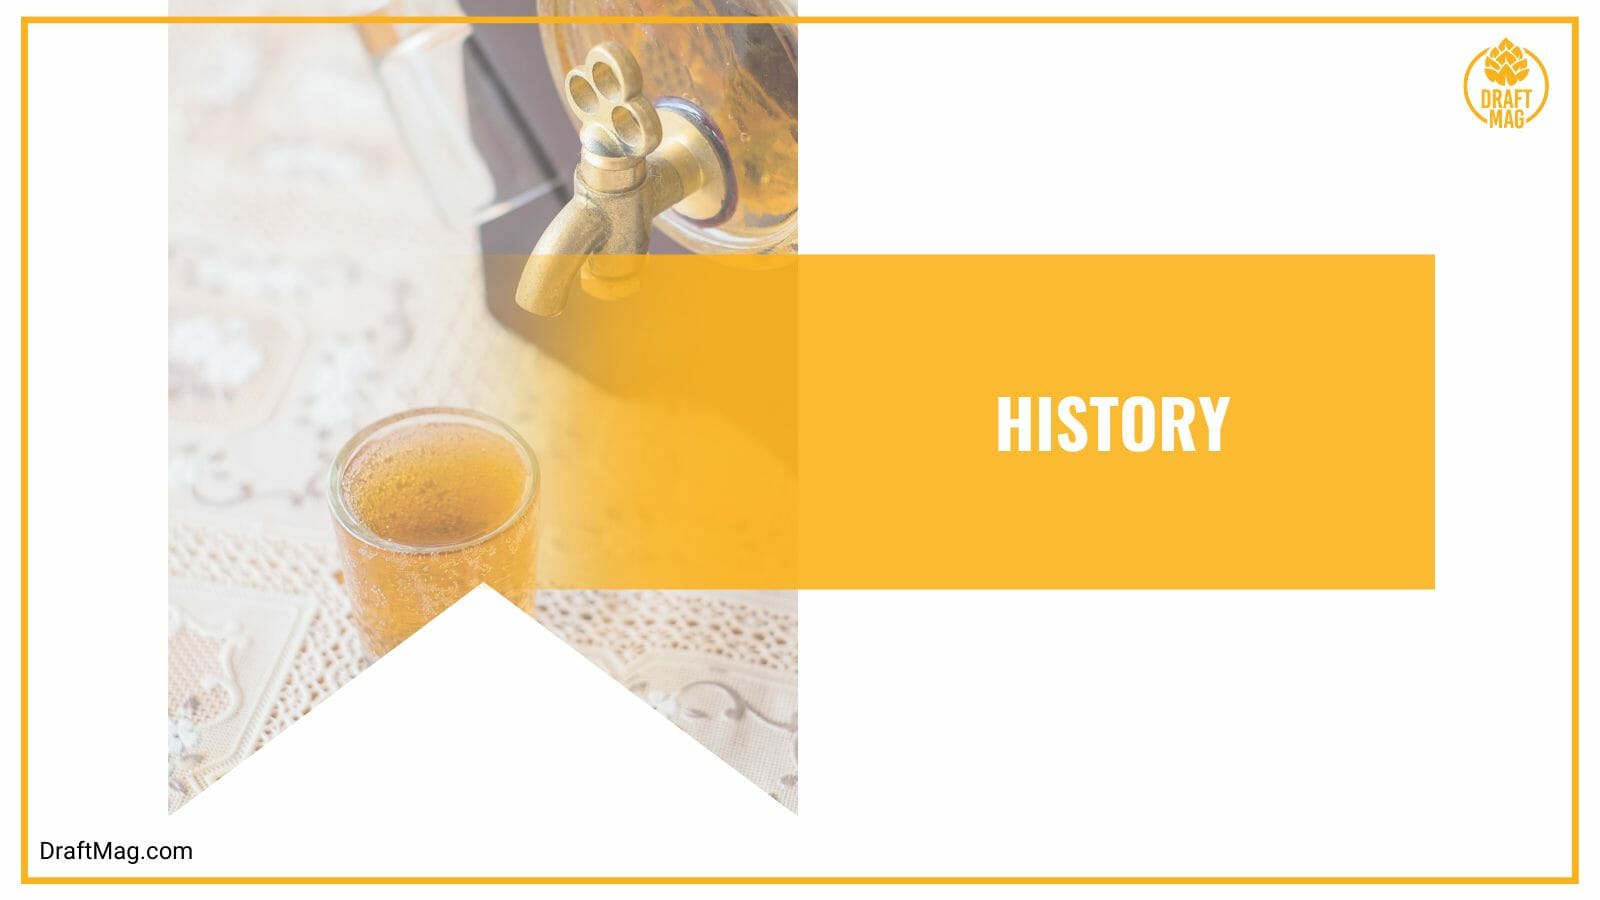 History of american pale ale